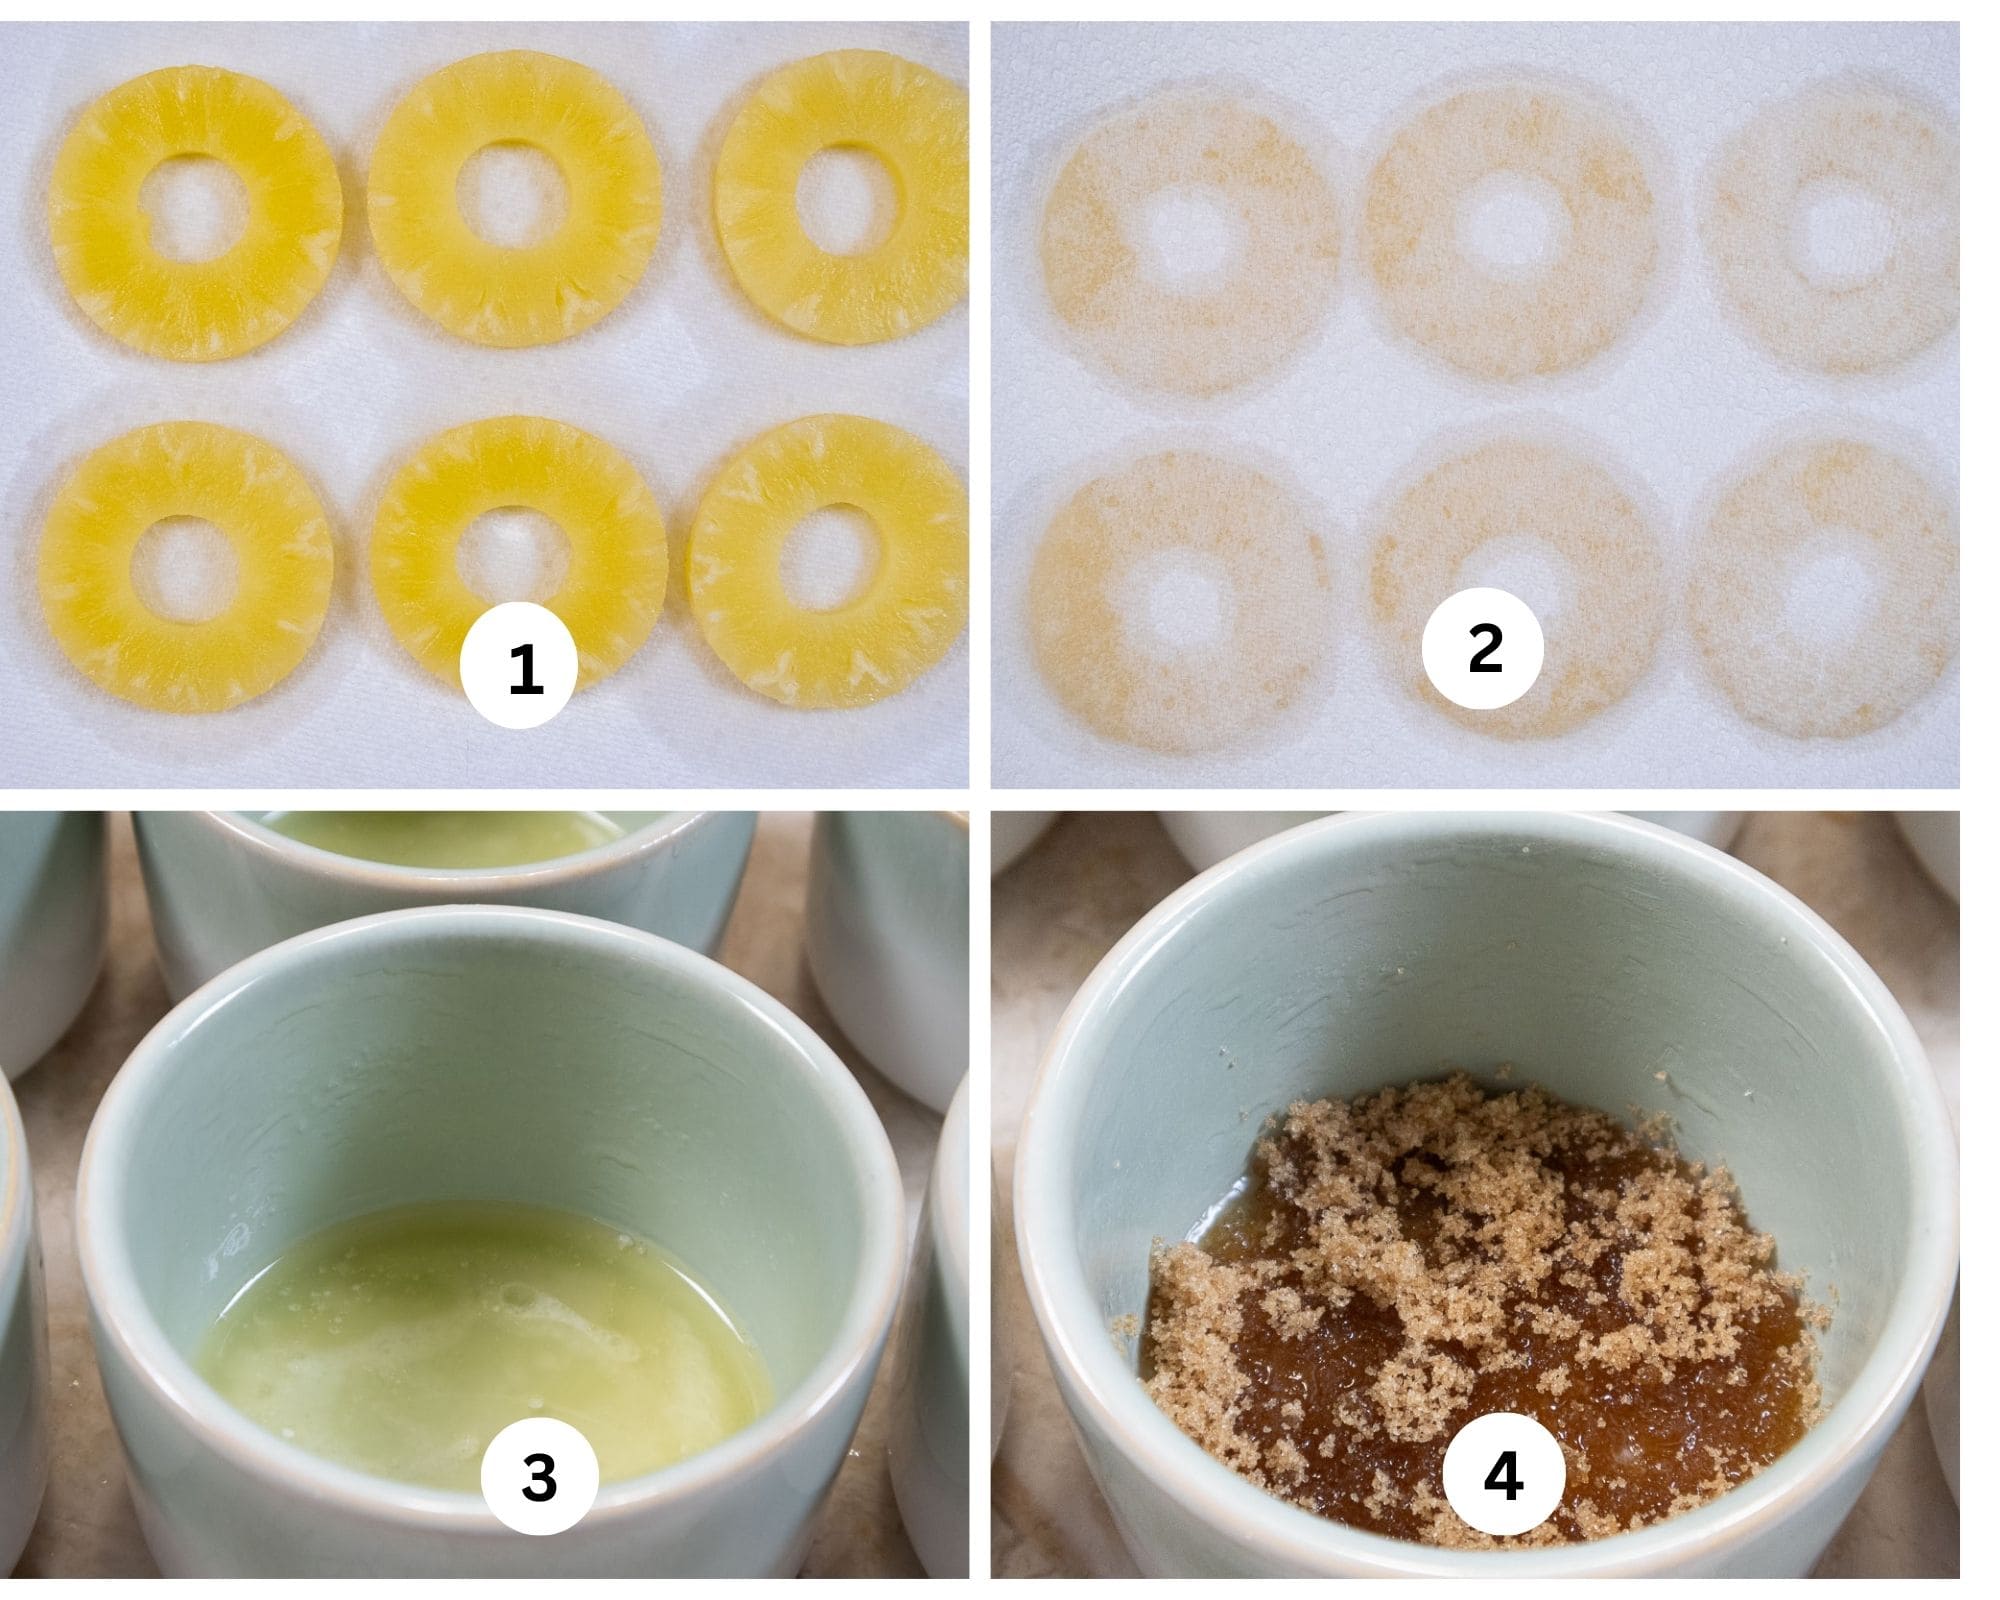 The first collage shows the pineapple slices on paper towels, paper towels on top of the slices, butter in the ramekin and brown sugar over the butter.